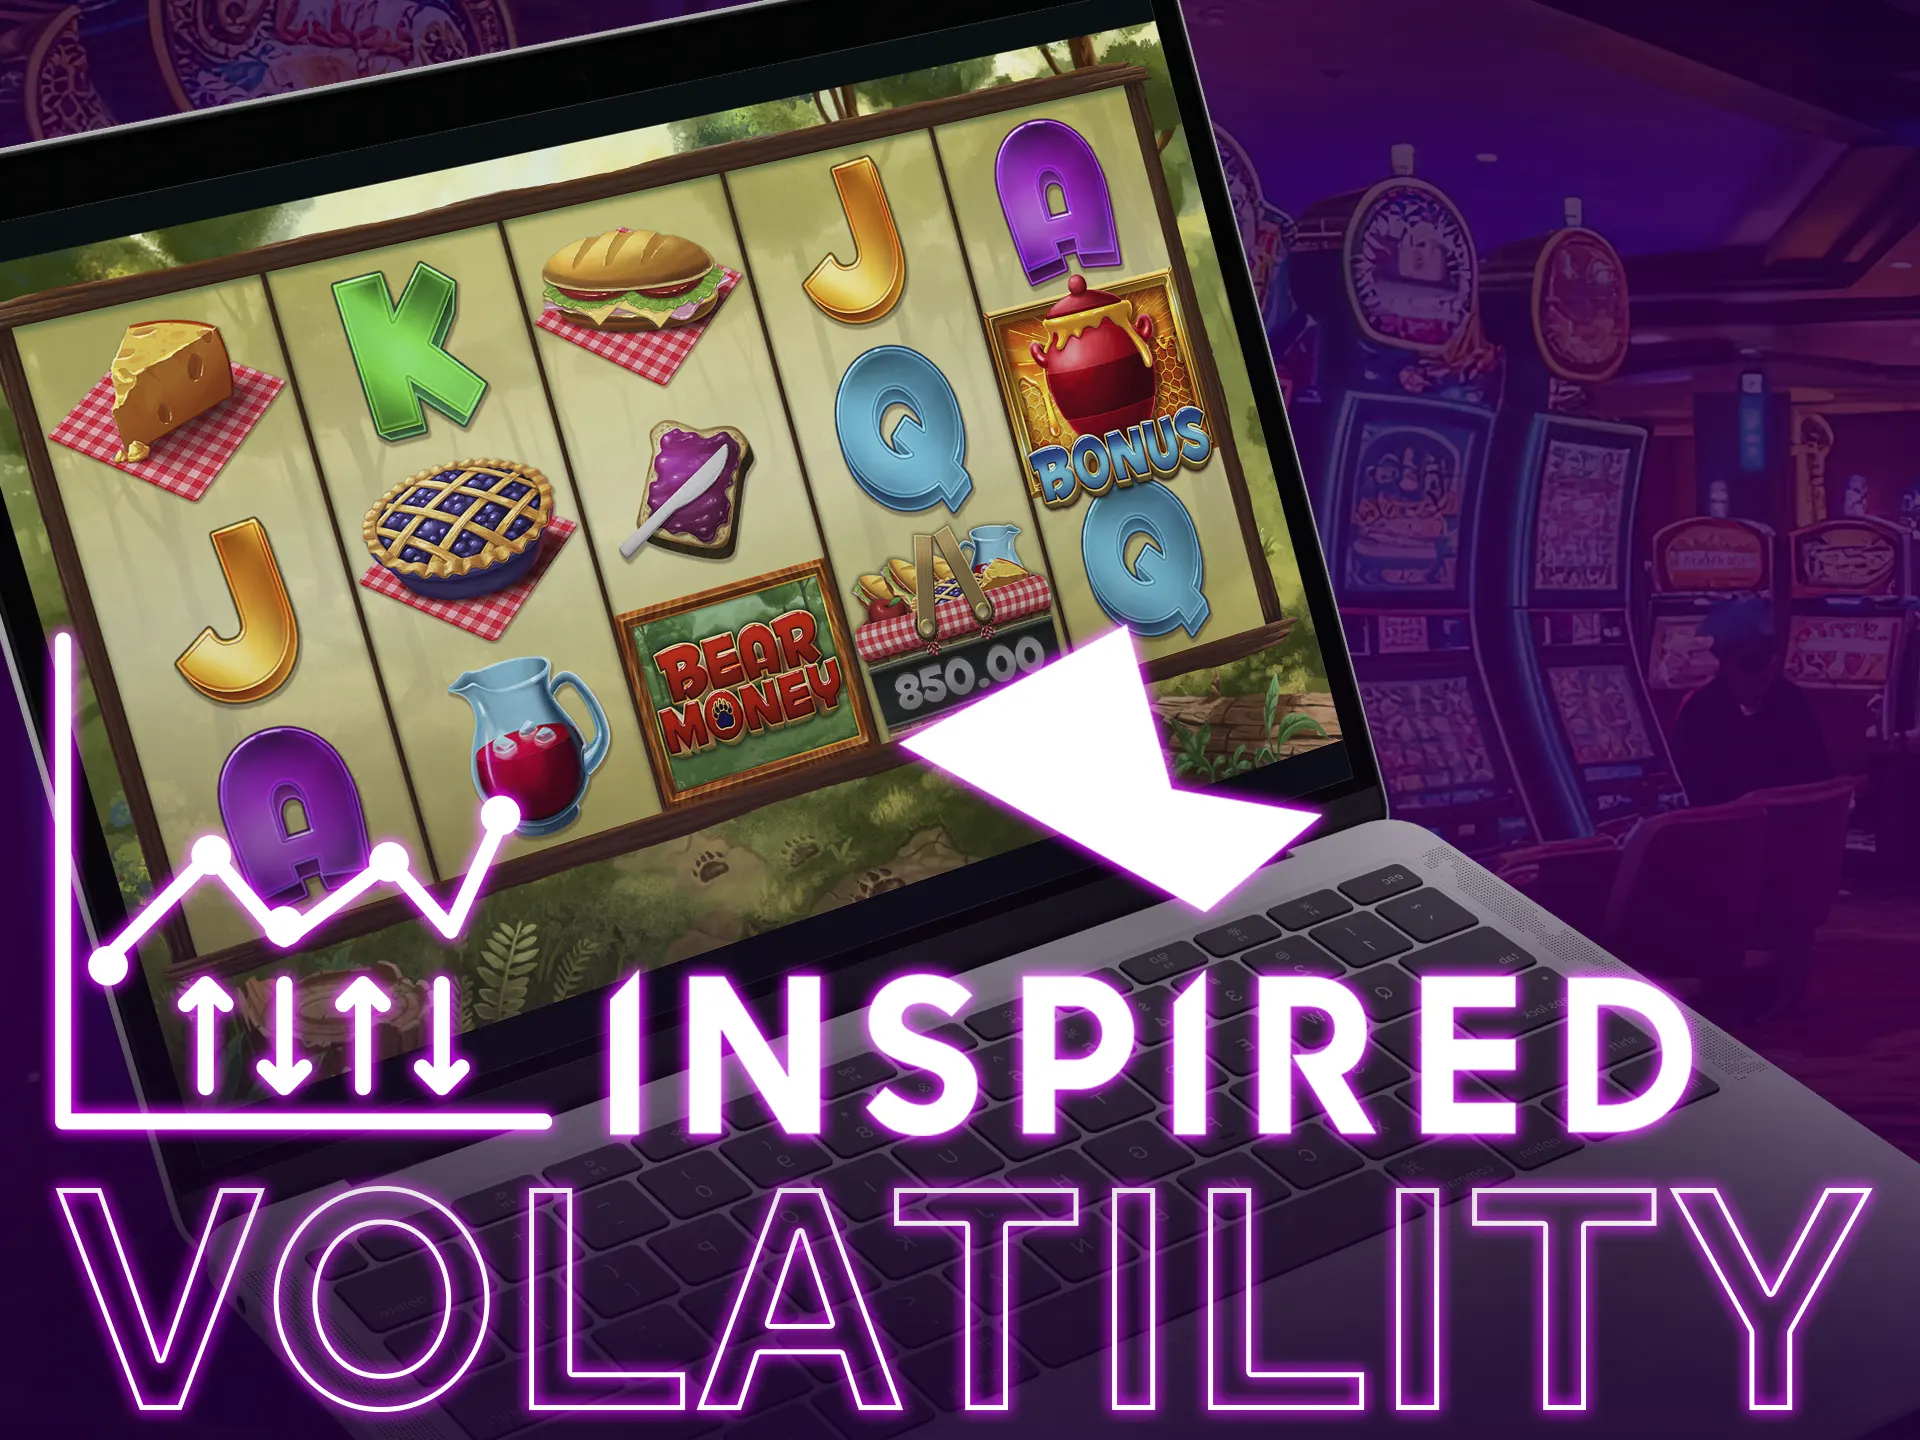 Inspired Gaming slots offer medium to high volatility levels.